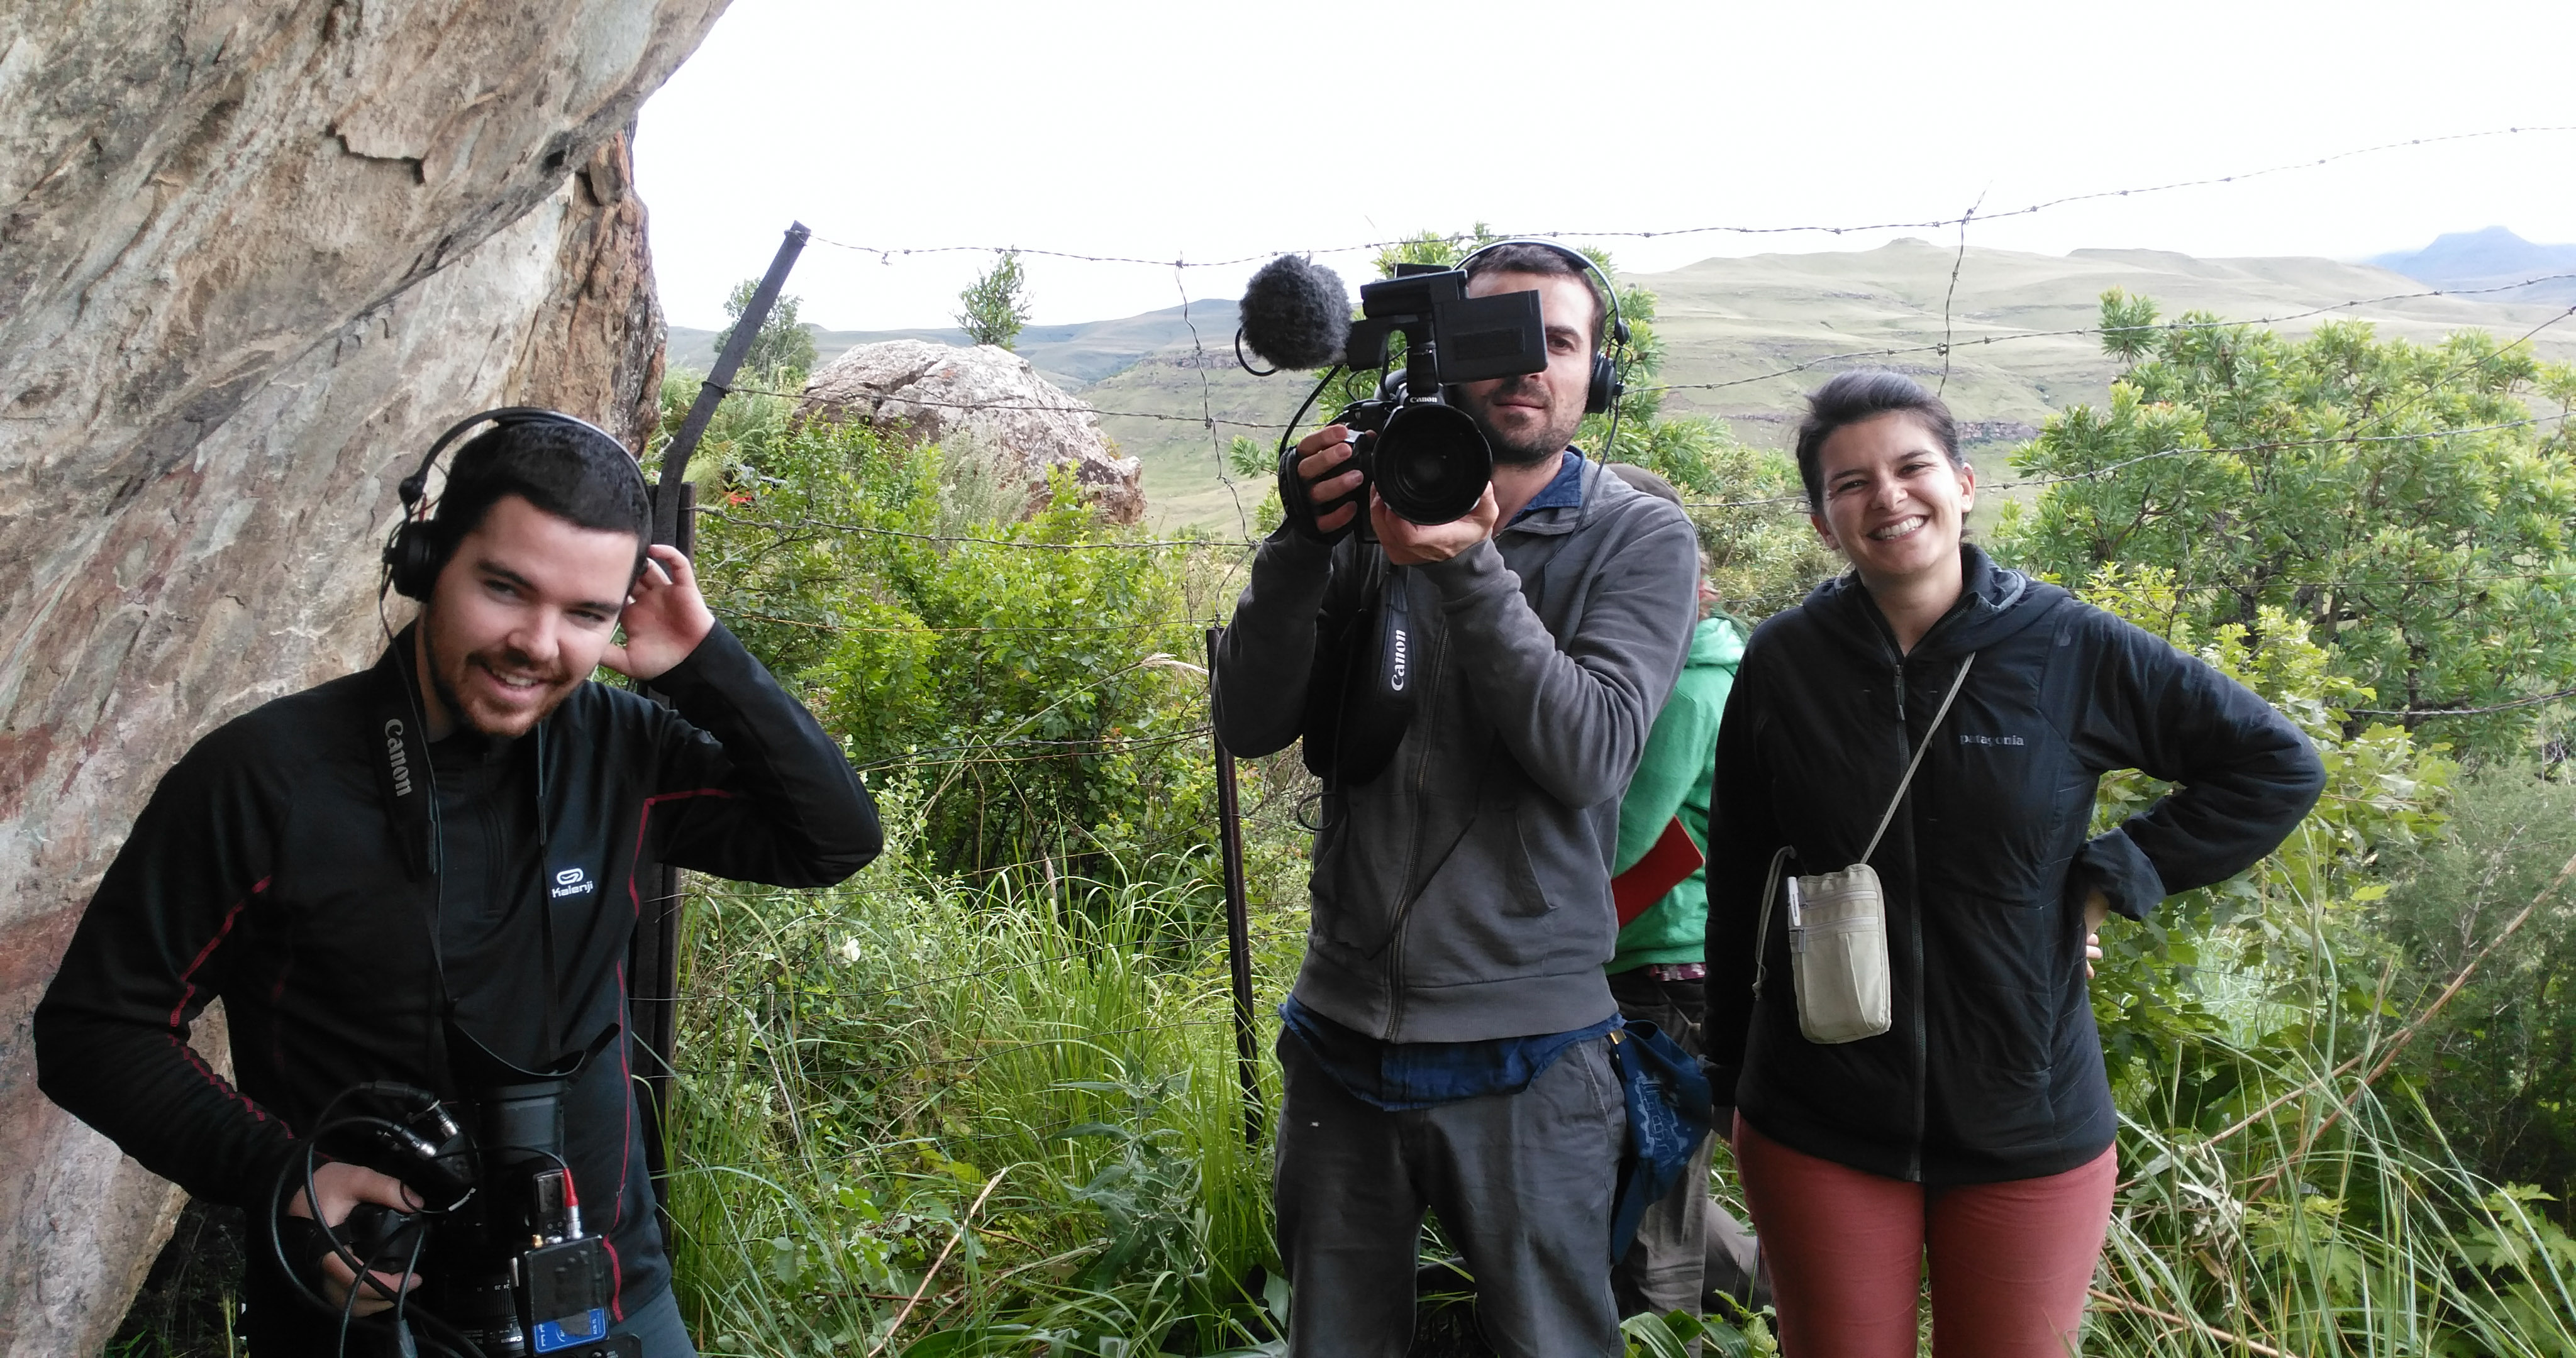 The filmers photographed! A crew from TSVP documentaries, France. They came to South Africa make a documentary about hunter-gatherer rock art. We spent a few days in the Drakensberg, KwaZulu-Natal